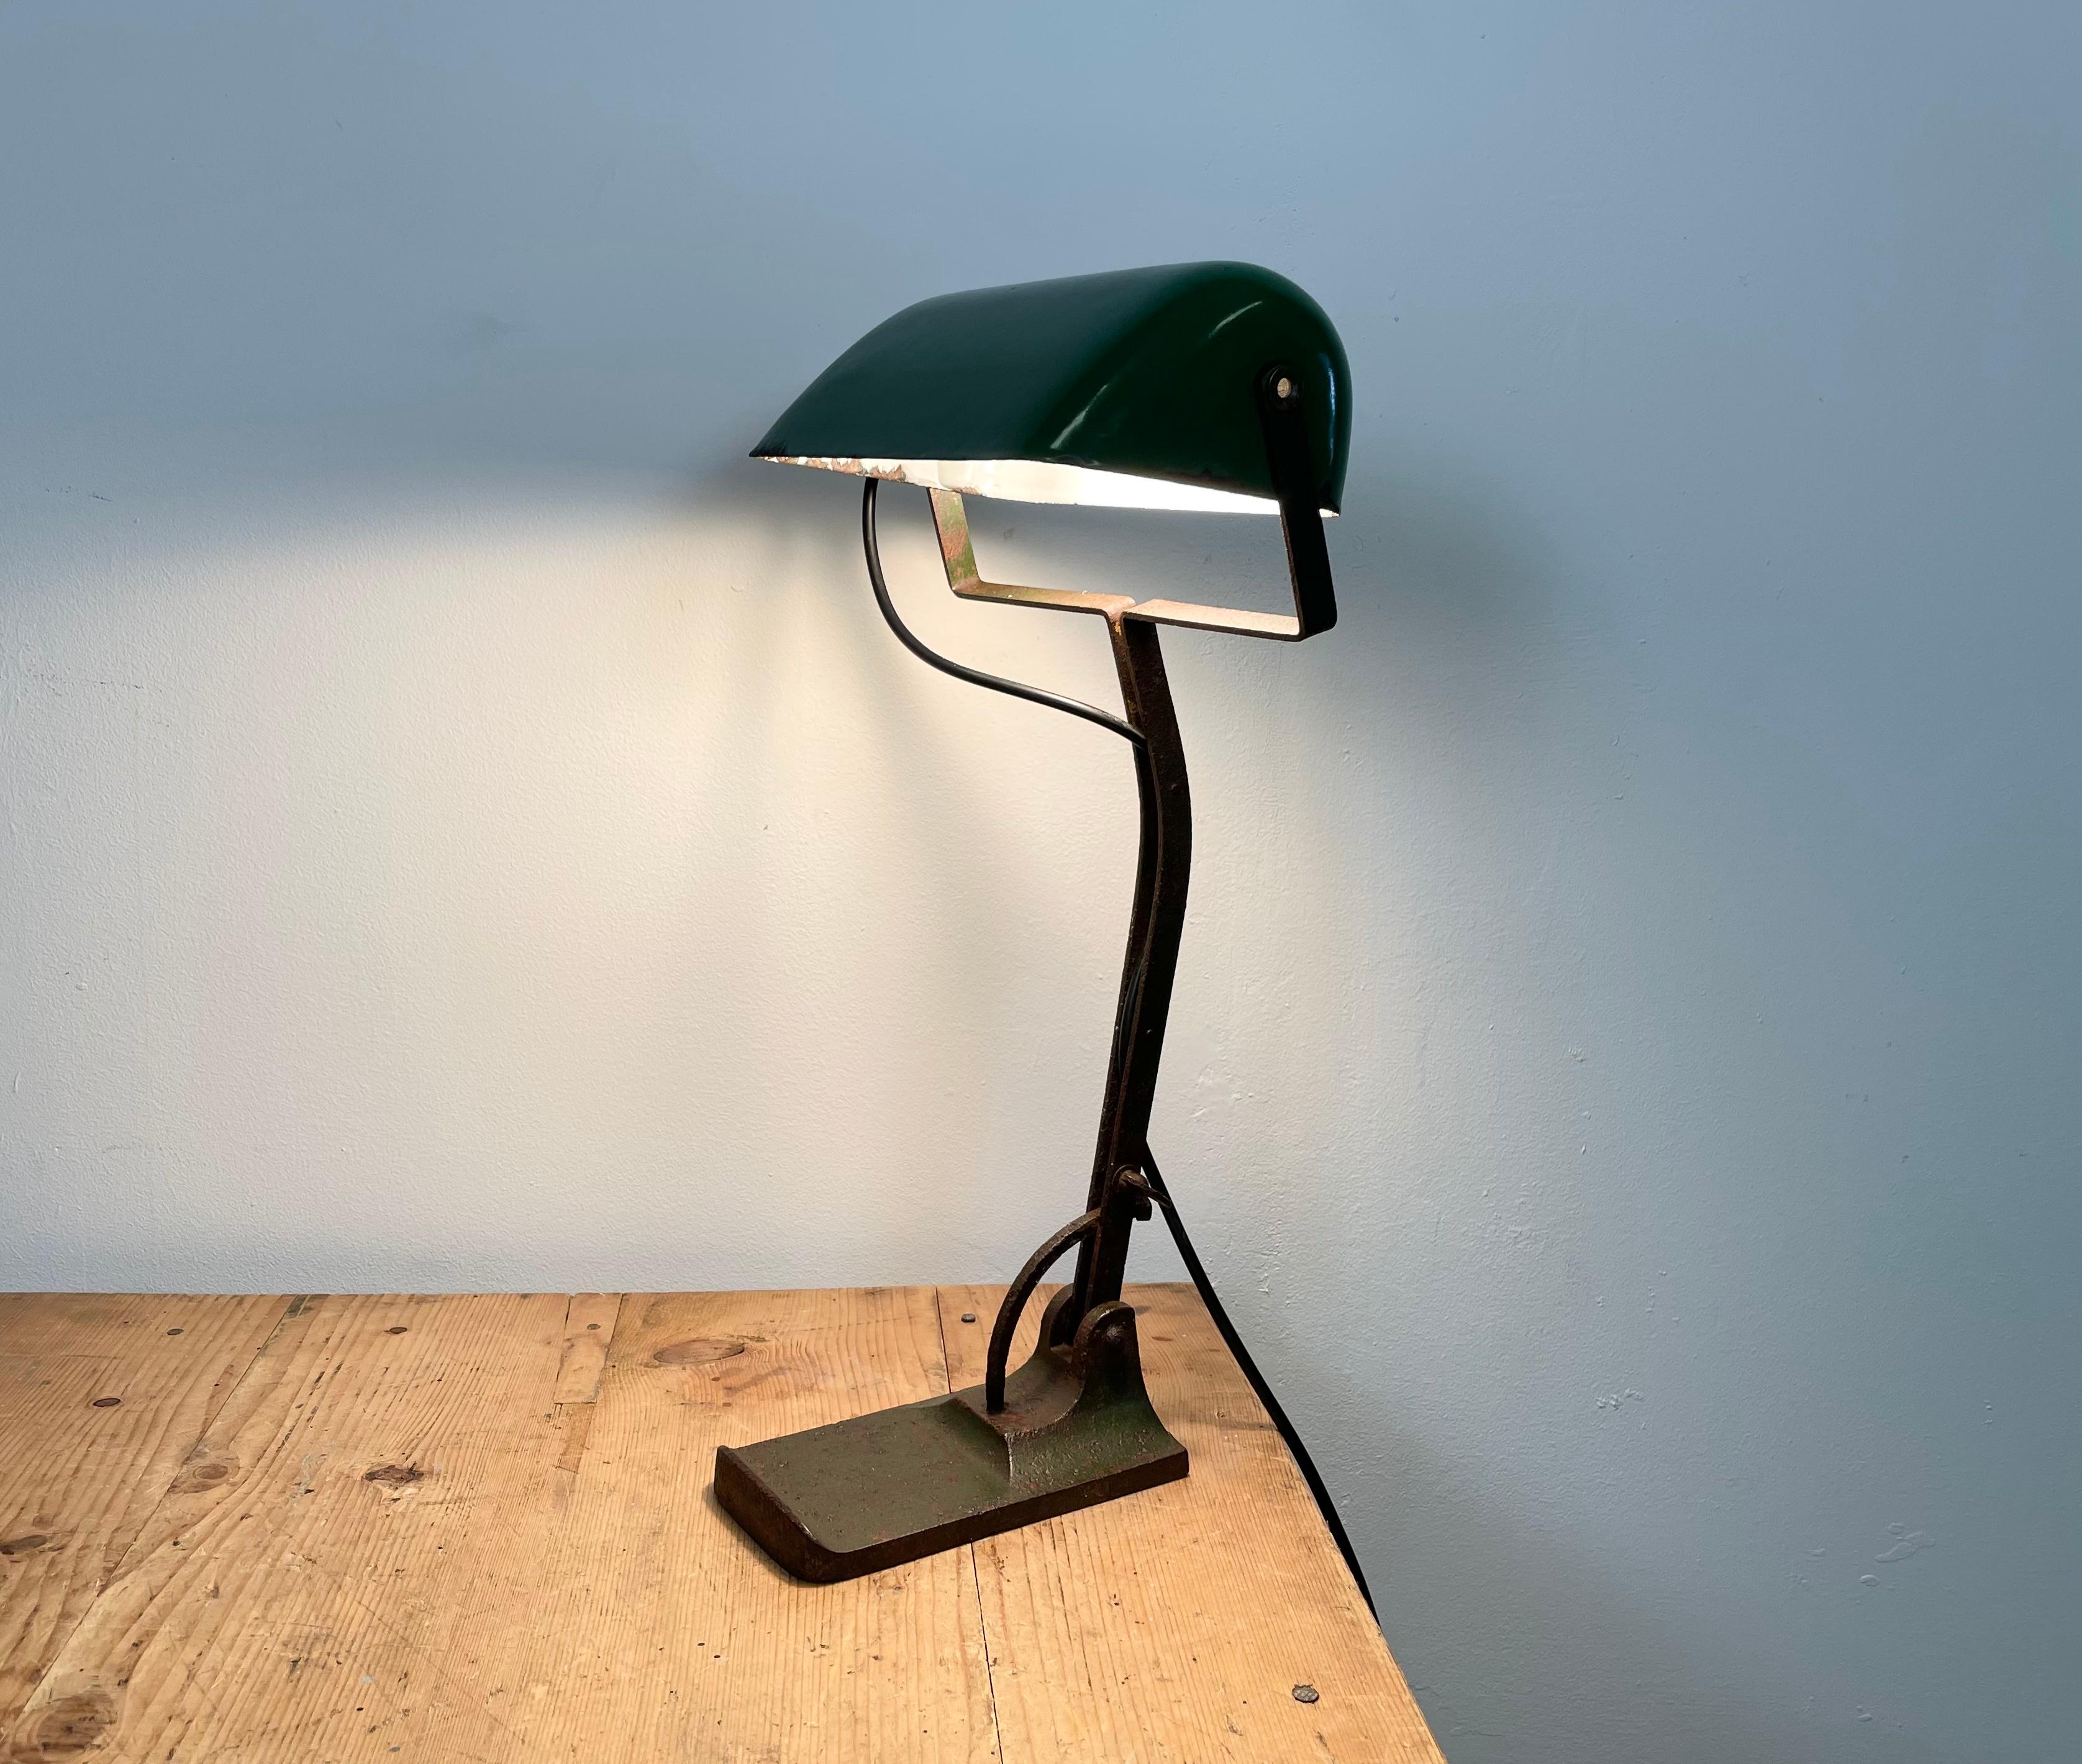 Vintage Green Enamel Bank Lamp from Astral, 1930s For Sale 6